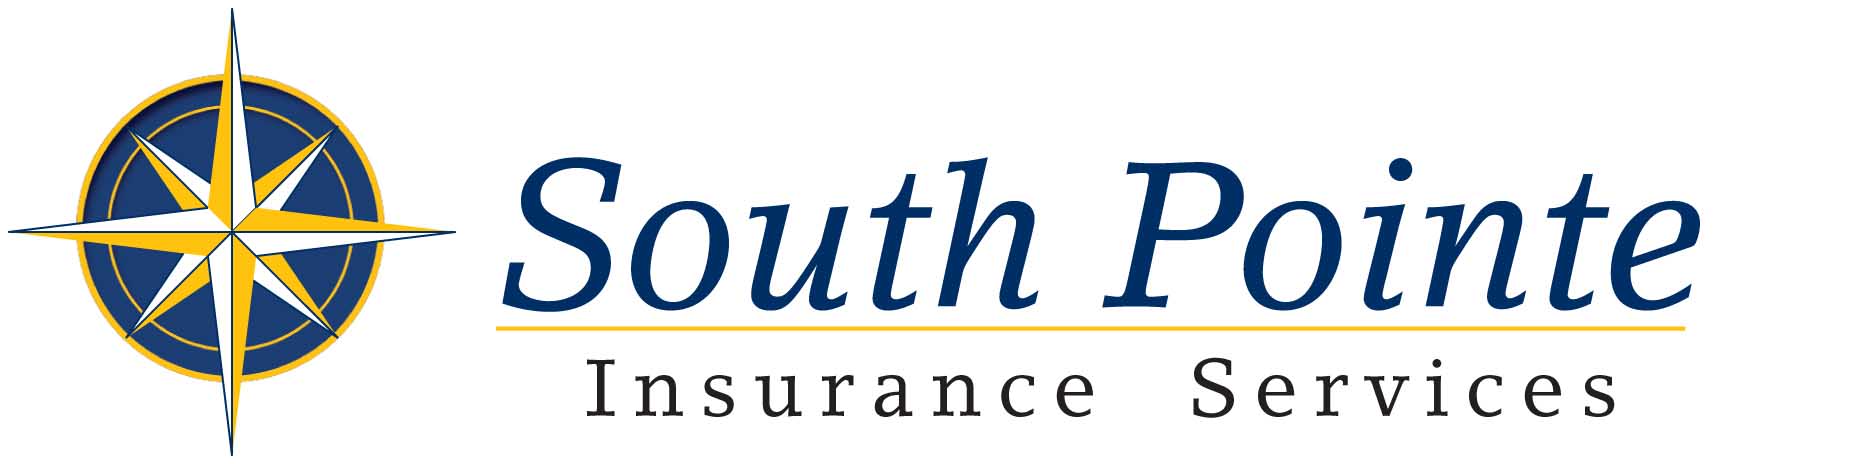 South Pointe Insurance Services logo